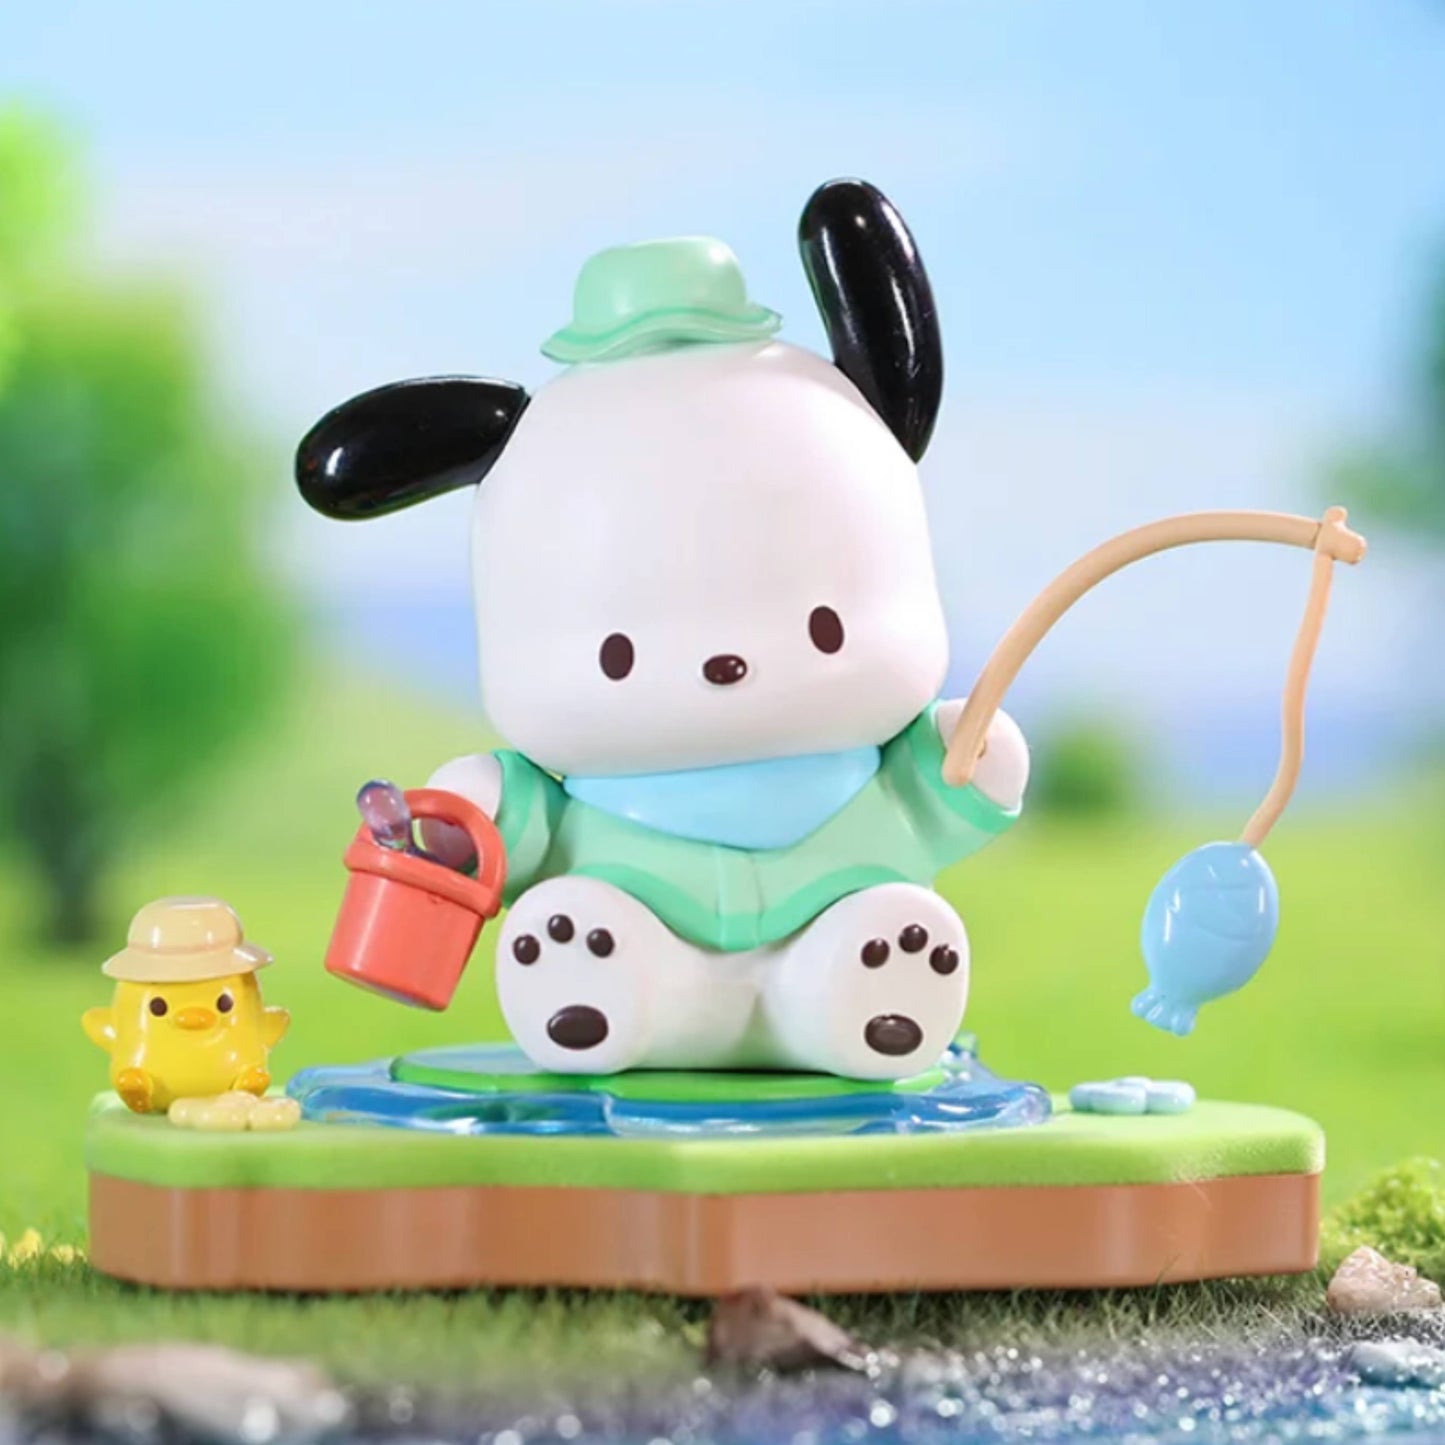 【Restock】Top Toy Sanrio Characters Camping Series Blind Box Random Style